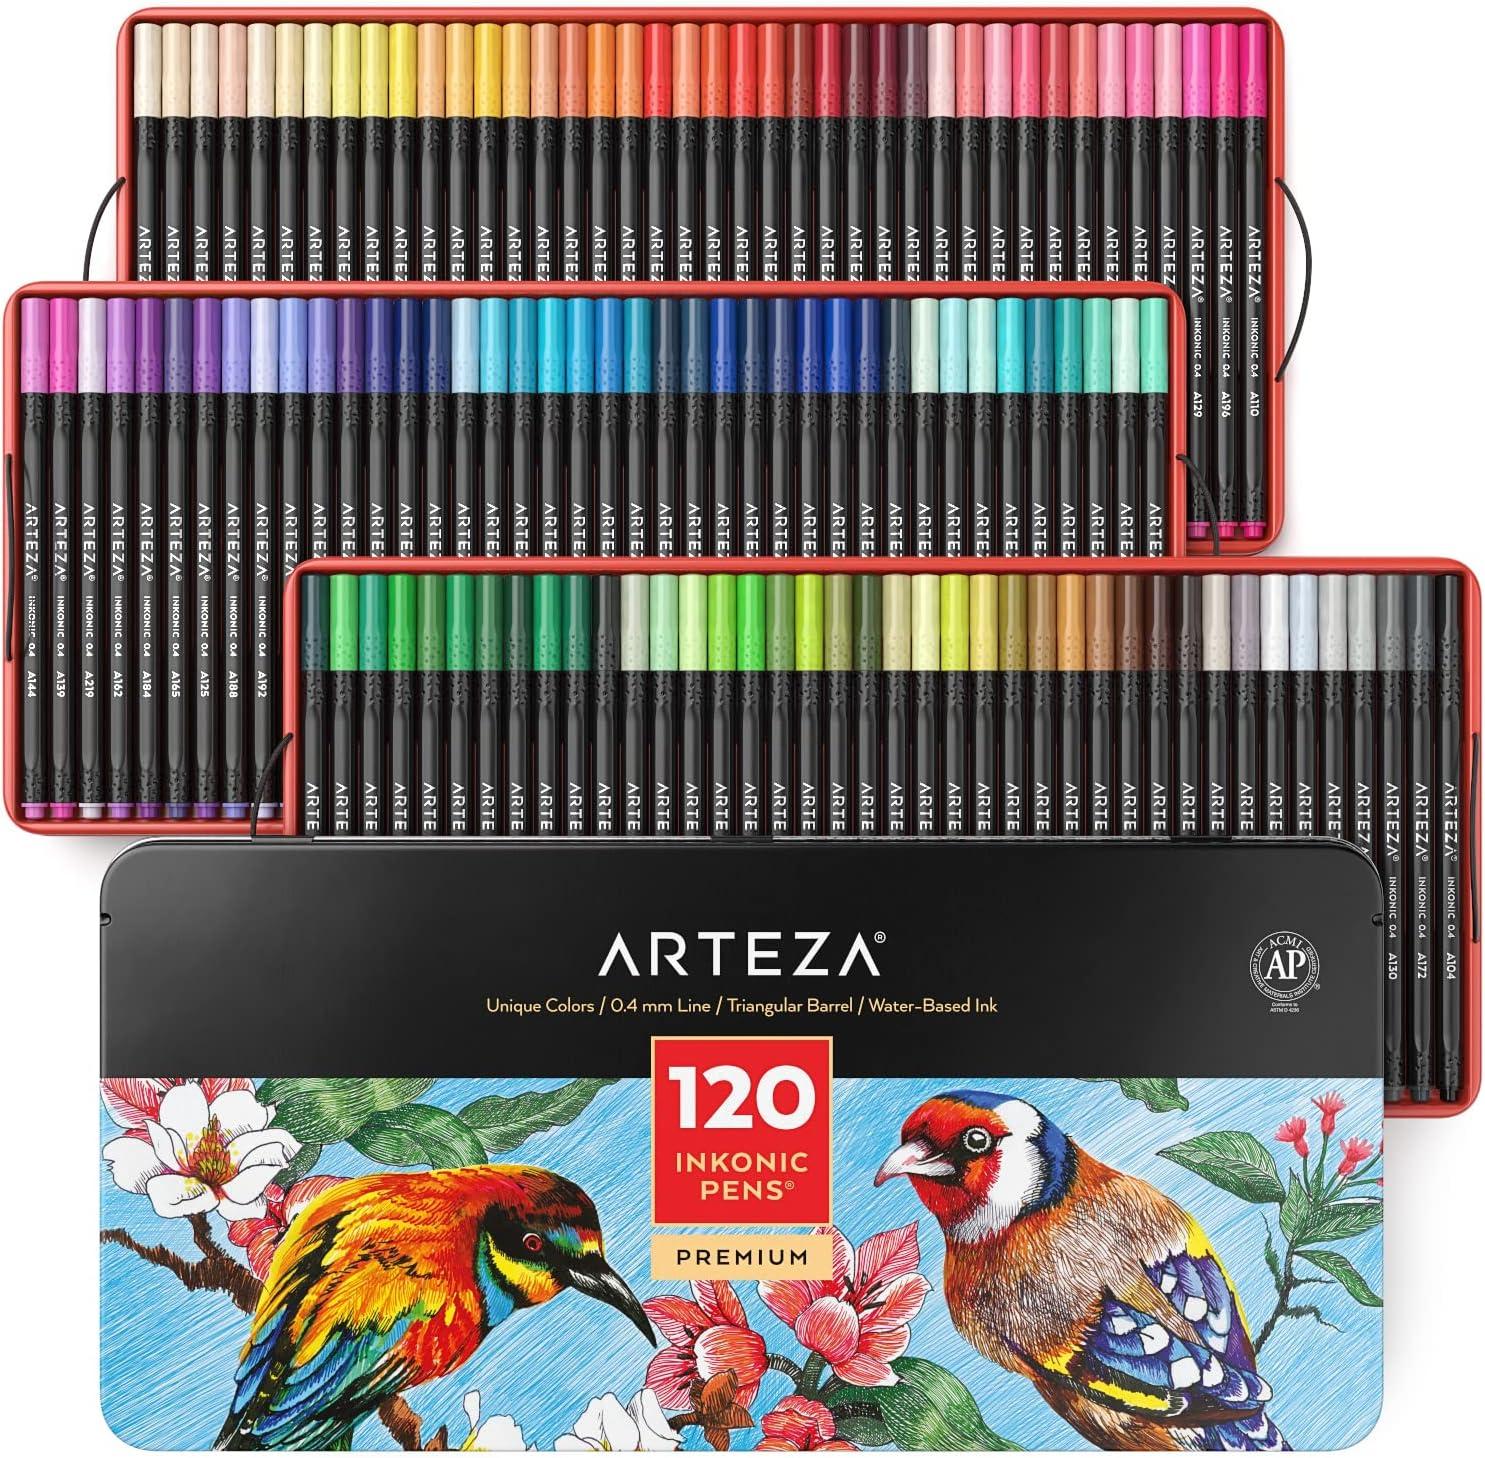 arteza inkonic fineliners set of 120 0 4 mm tips fine point markers assorted art pens water-based fine tip